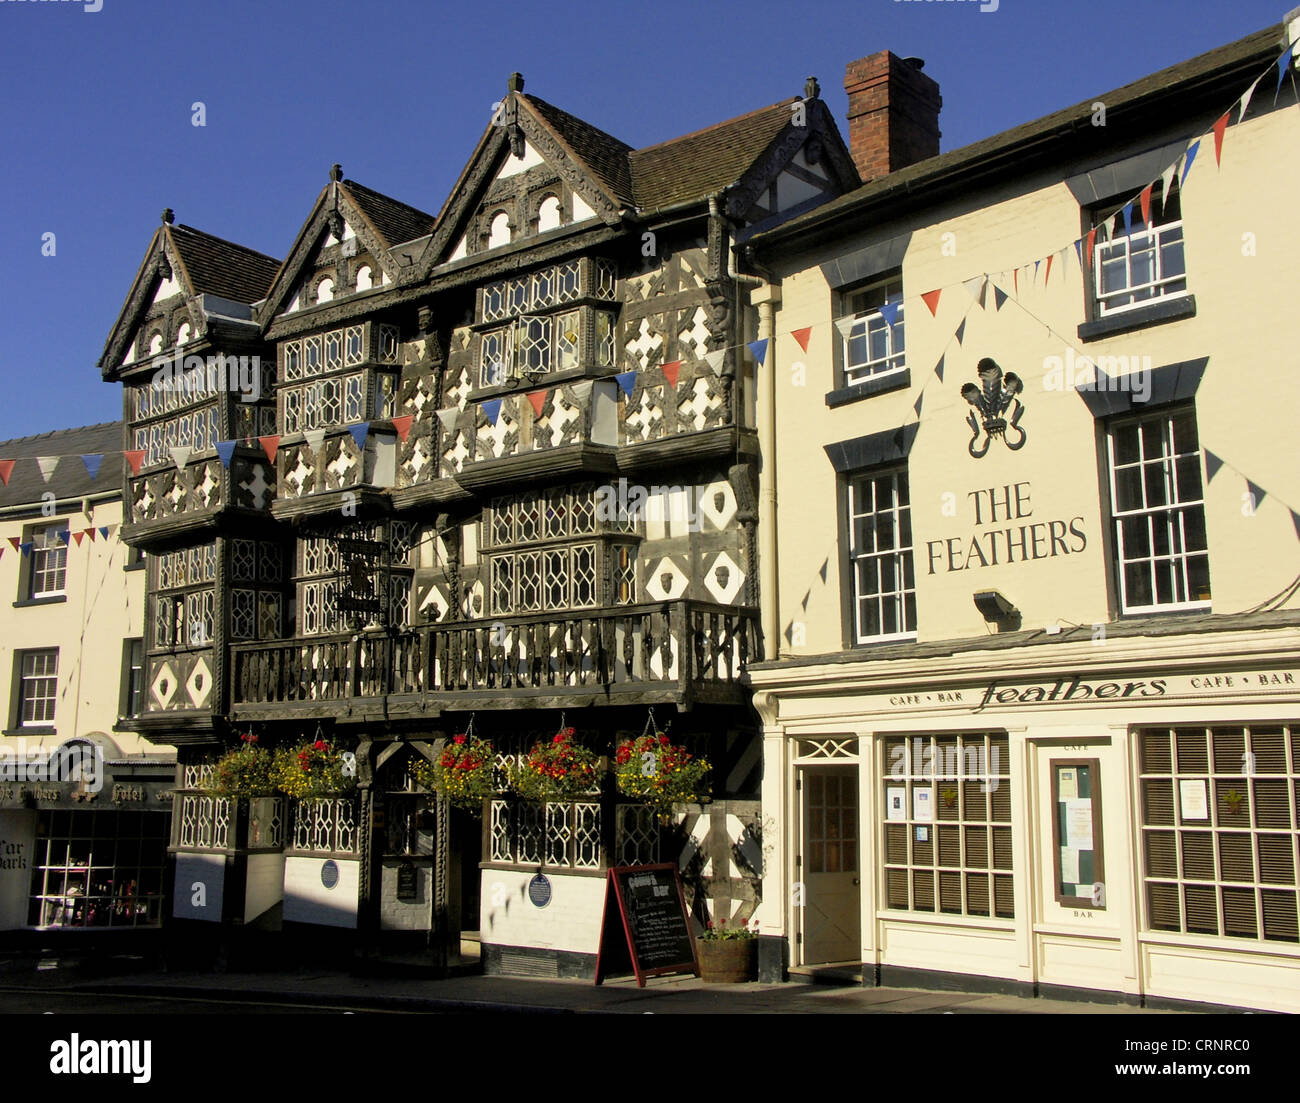 The Feathers hotel in Ludlow recognised for its beautiful Jacobean architecture and medieval heritage. The New York Times descri Stock Photo